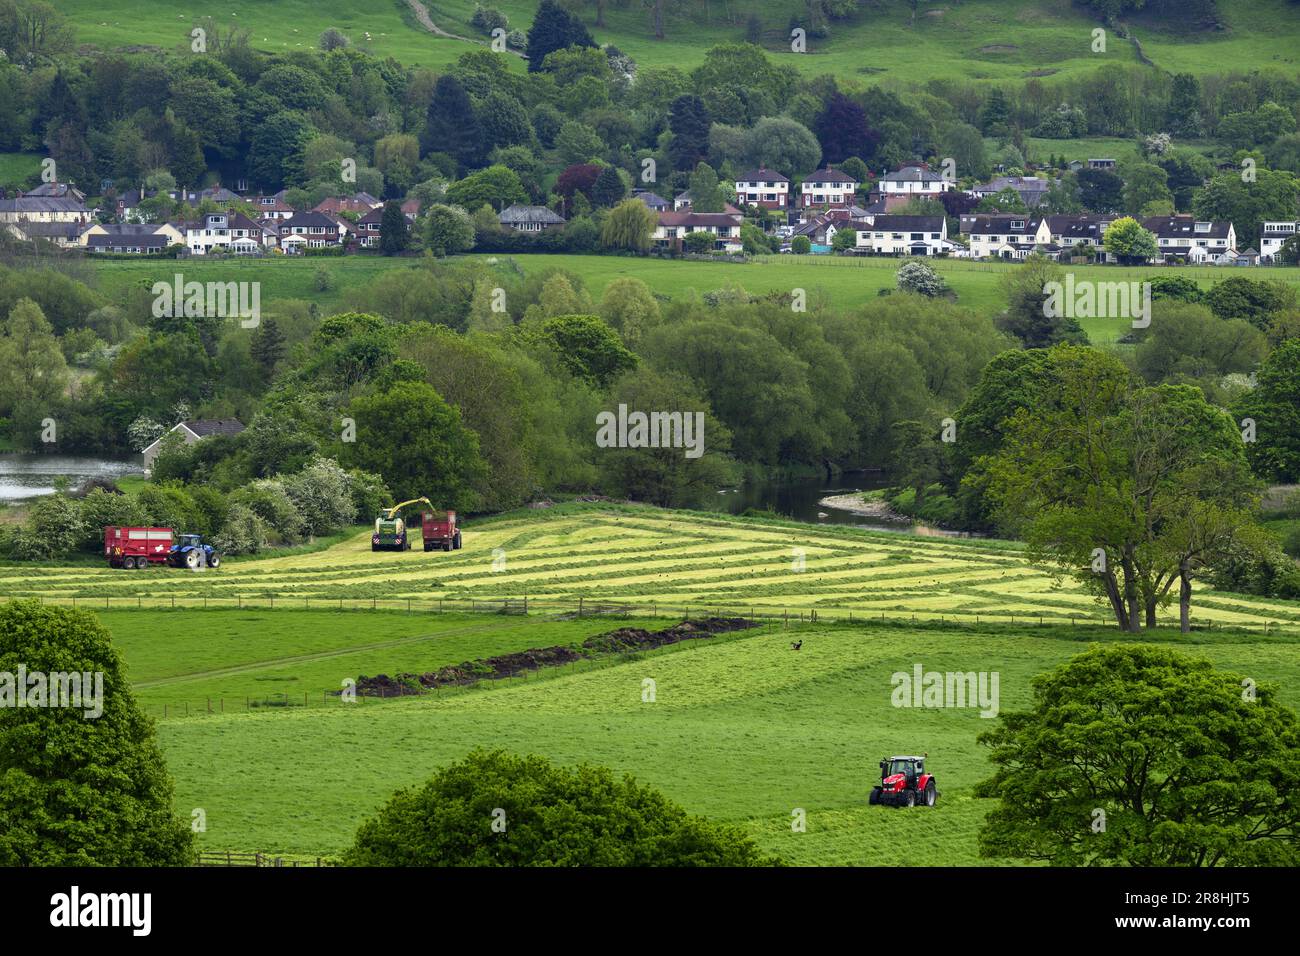 Haymaking - (forager driven on farmland fields, loading filling trailer, cut grass lines, farmers driving & working) - Otley, Yorkshire, England, UK. Stock Photo